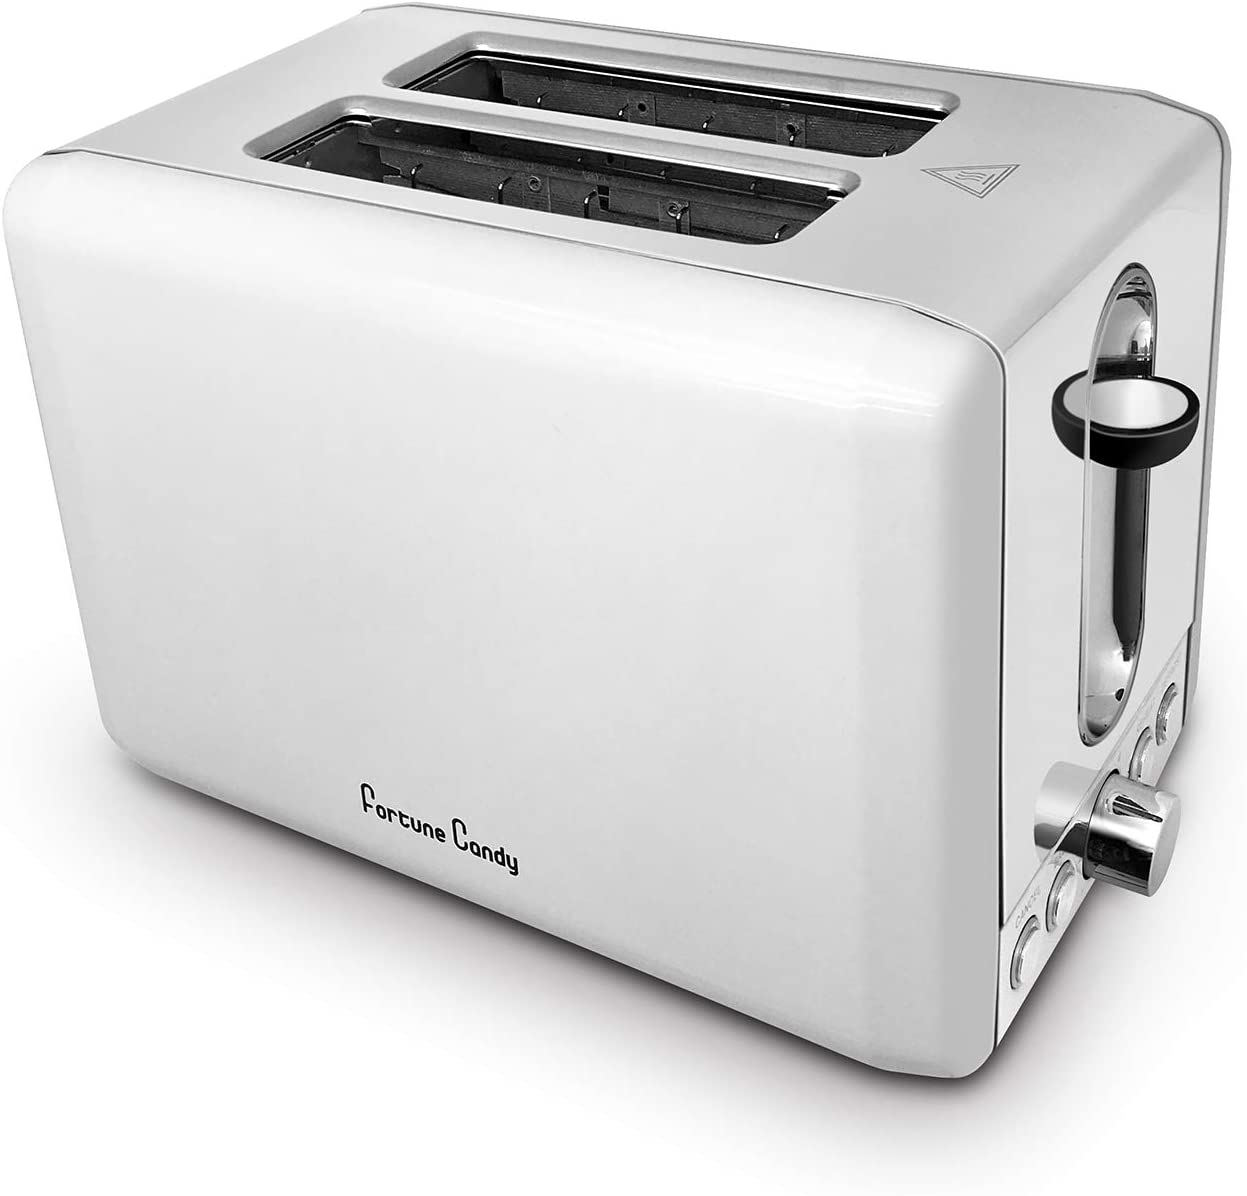 Toaster 2 Slice Best Rated Prime Toaster